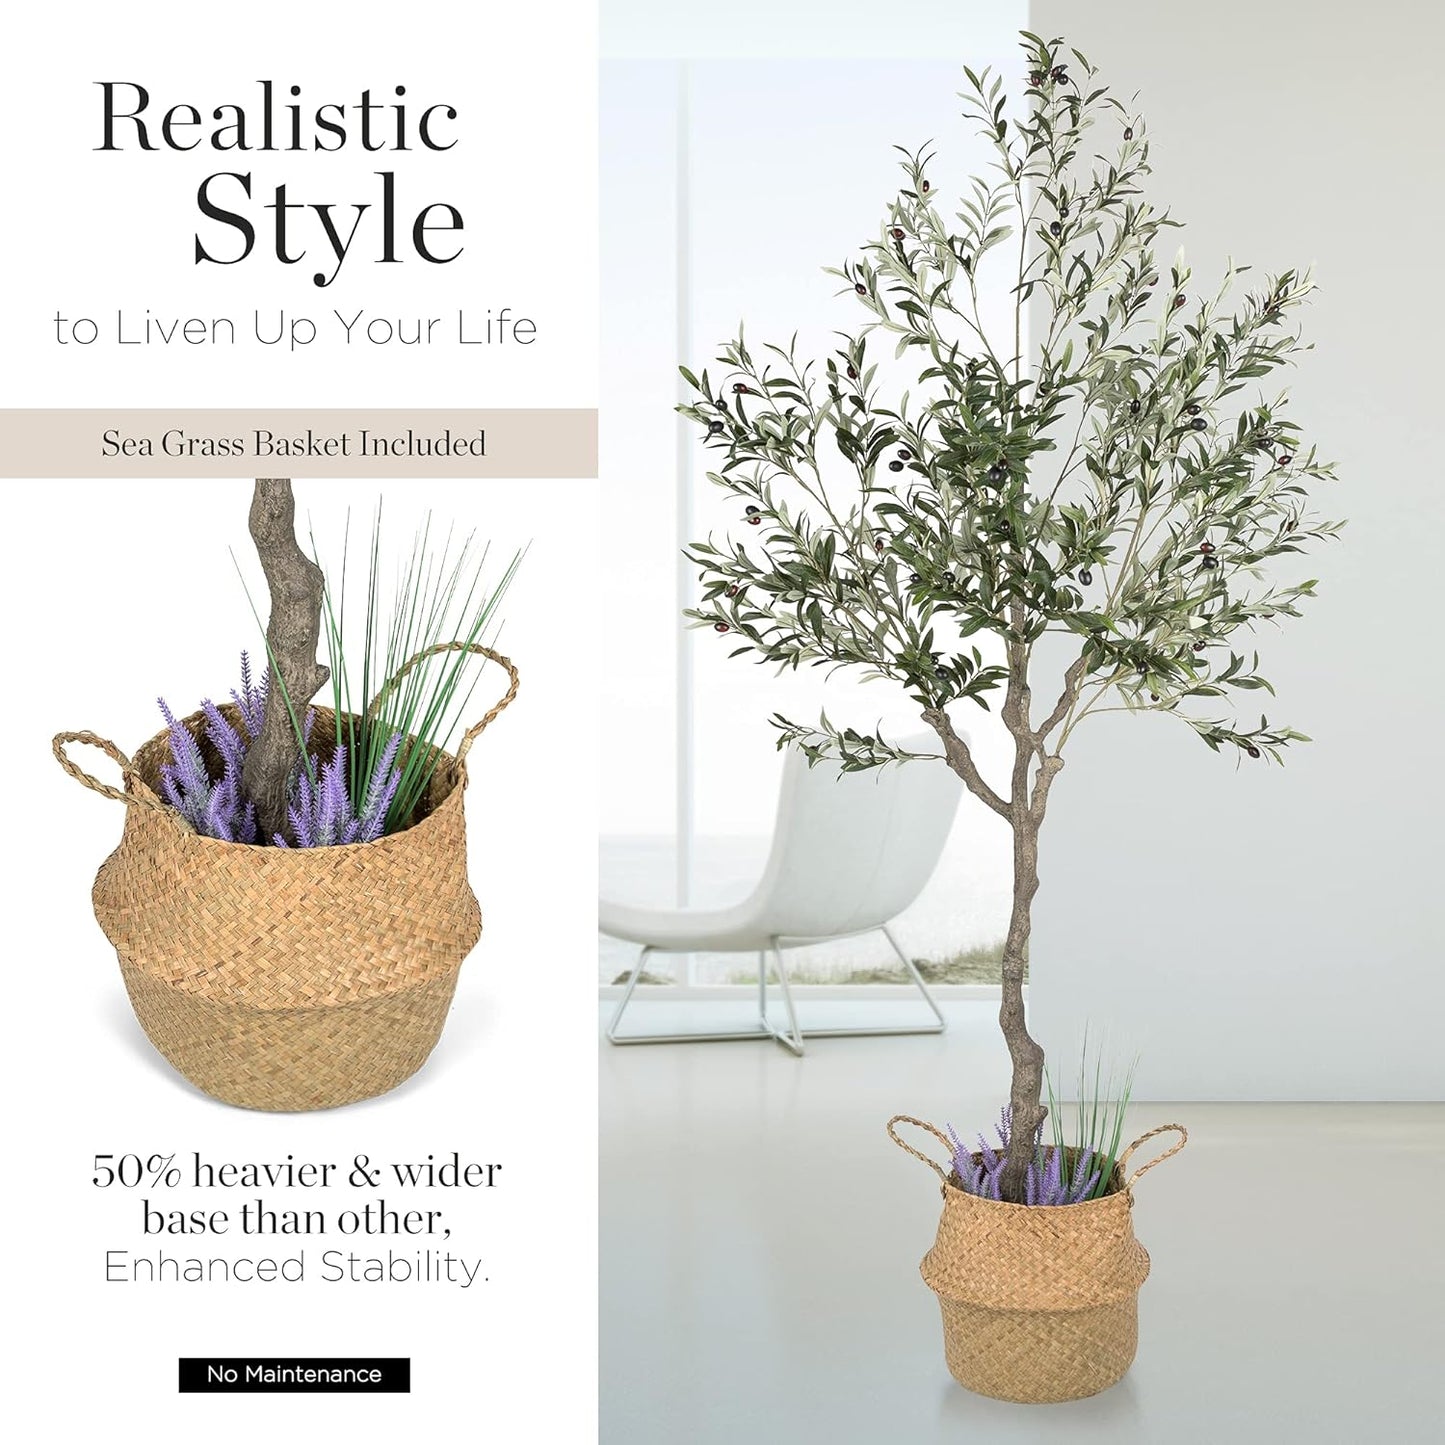 Artificial Olive Tree, 82 Inches Tall - Fake Floor Plant for Modern Home Decor - Living Room, Bedroom, Balcony - Faux Potted Trees for Indoor or Outdoor - Includes Seagrass Belly Basket